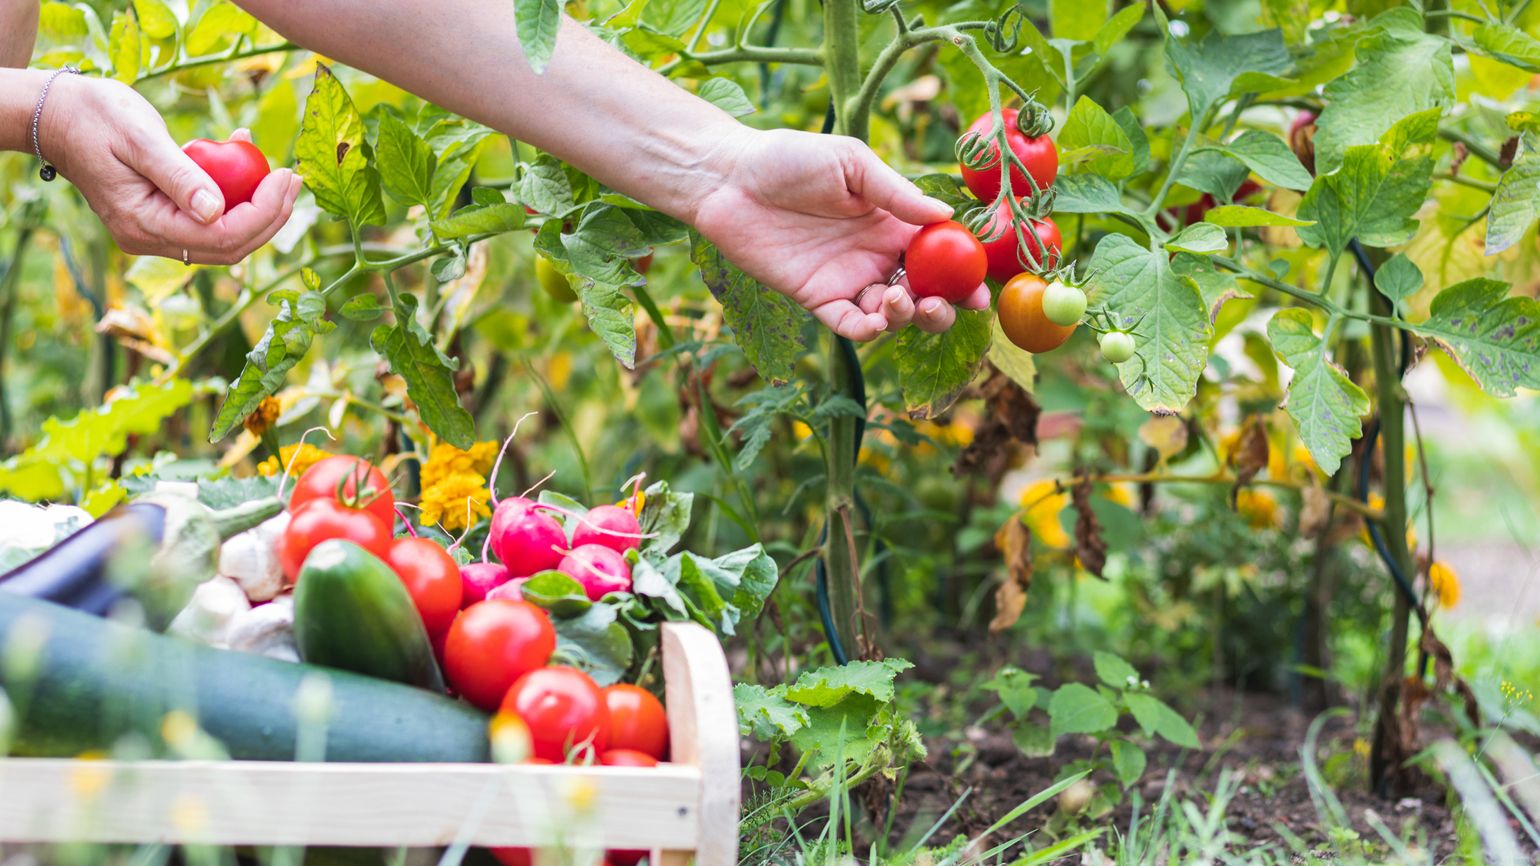 Picking tomatoes from a vegetable garden; Getty Images